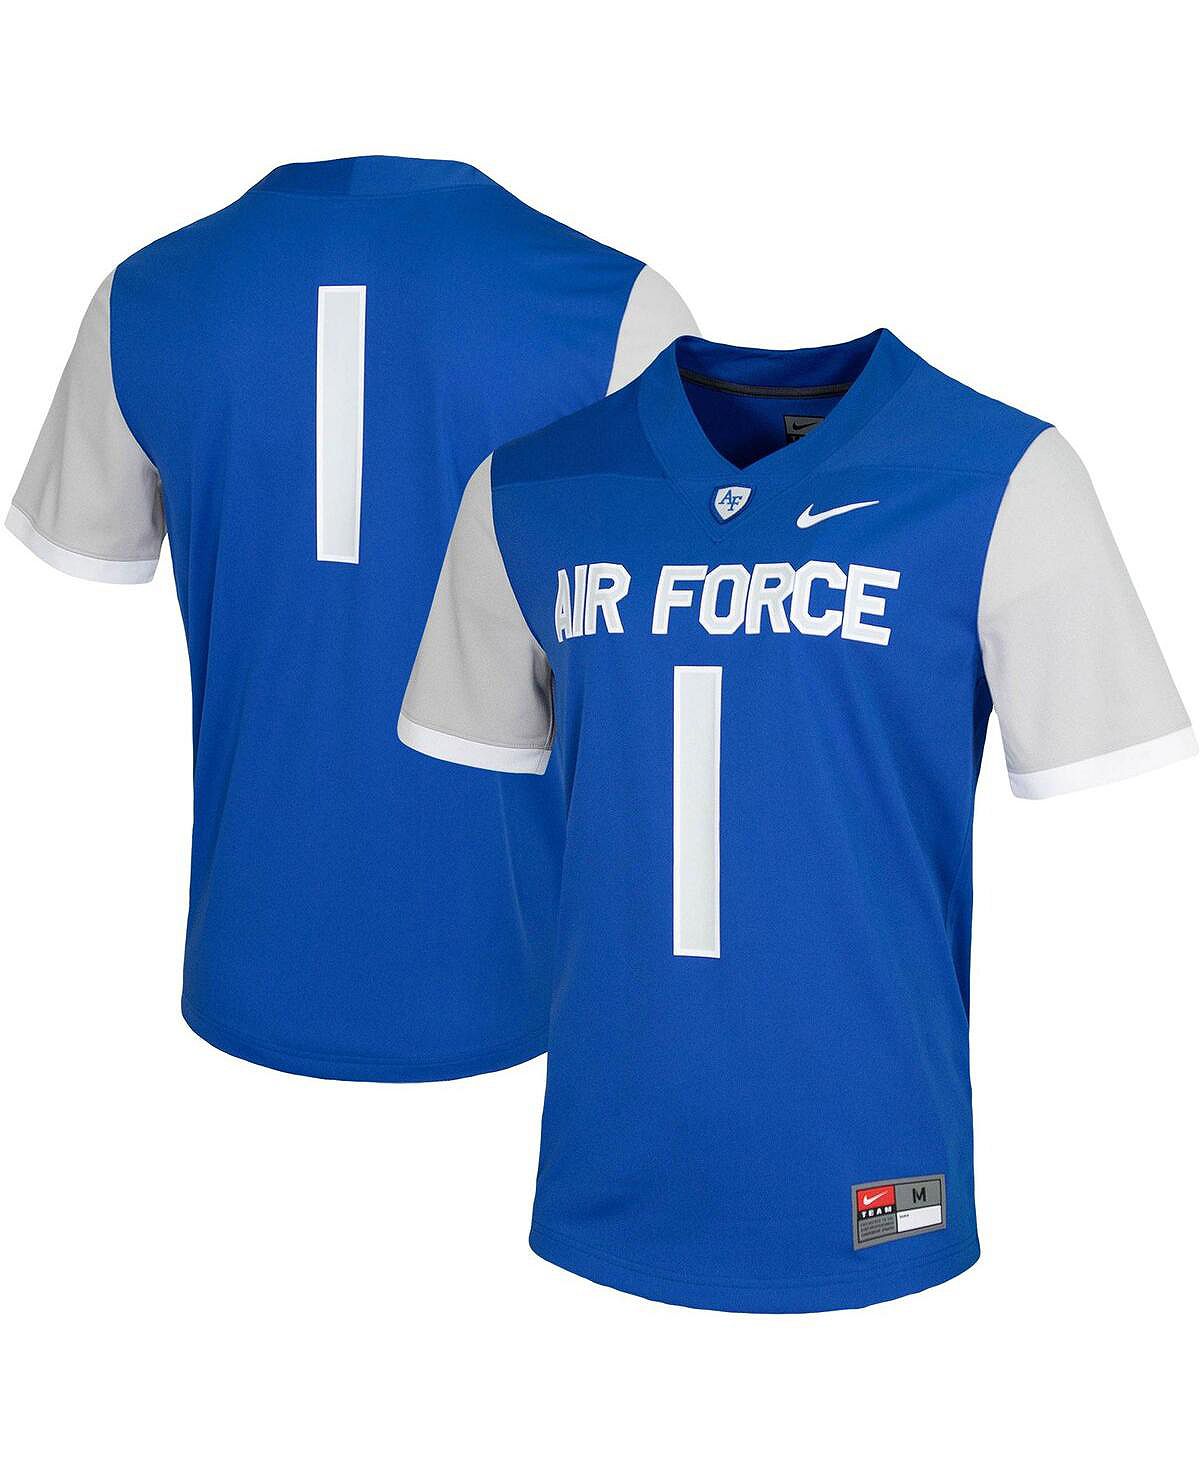 Мужское джерси #1 royal air force falcons untouchable game jersey Nike air force serenity ty9171wh